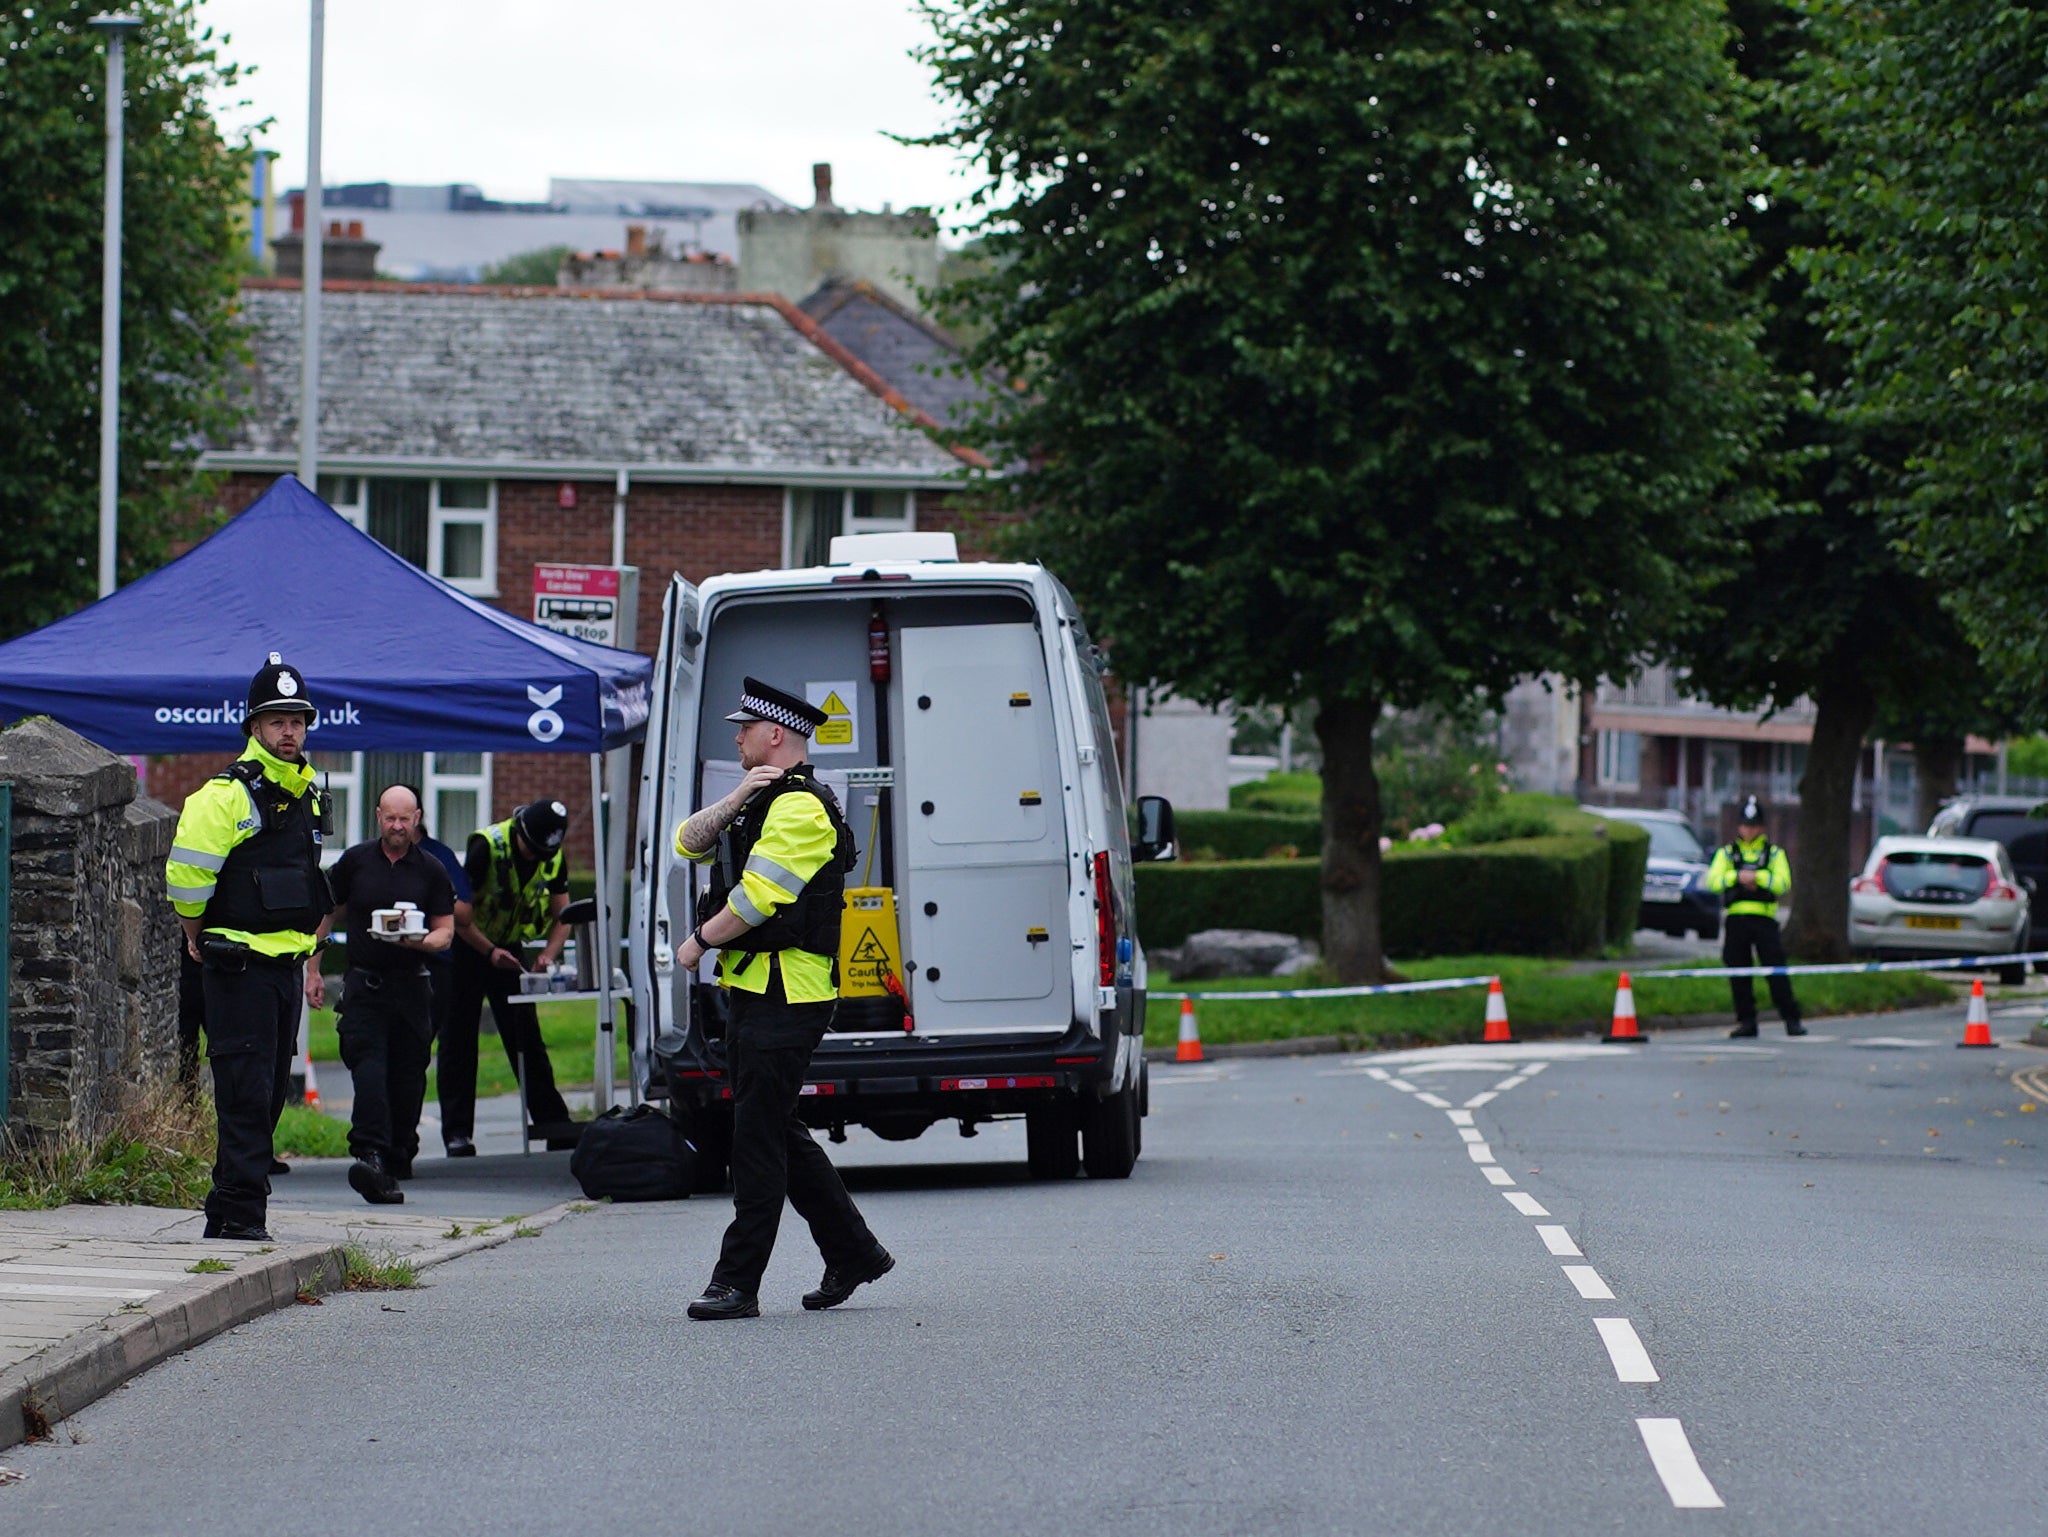 Police activity in Royal Navy Avenue in the Keyham area of Plymouth